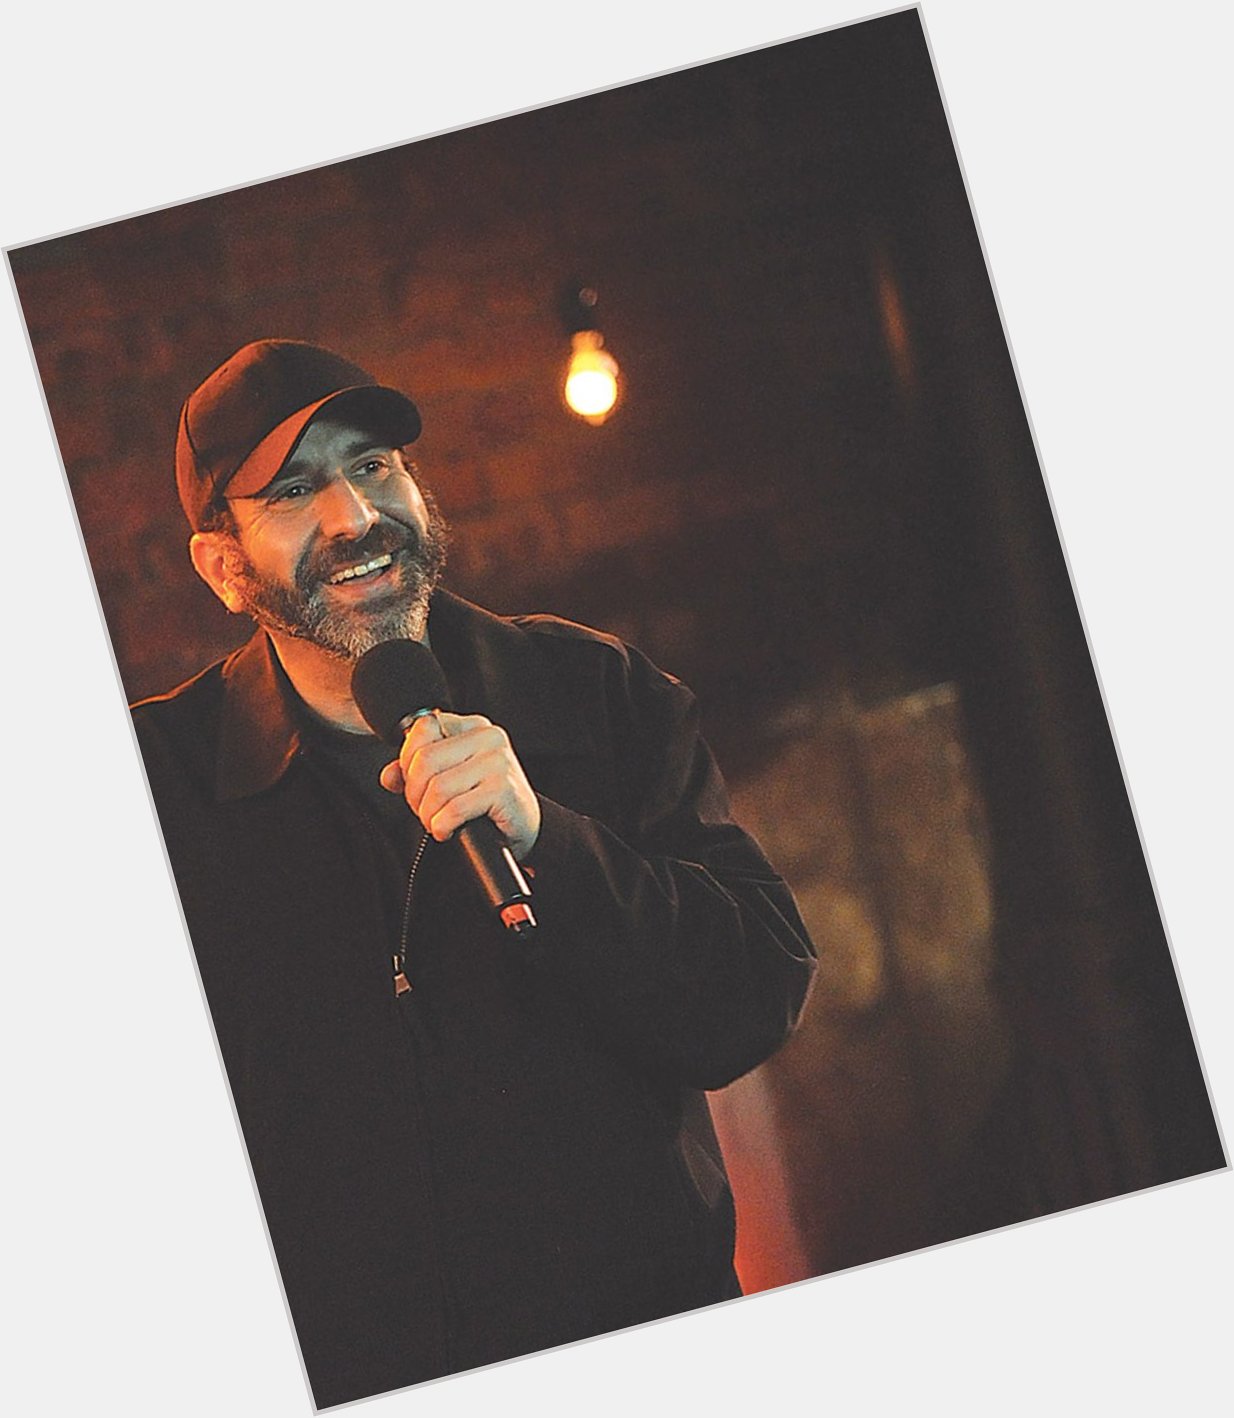 Happy birthday to Dave Attell, my favorite comedian of all time. I hope there are many more years to come 